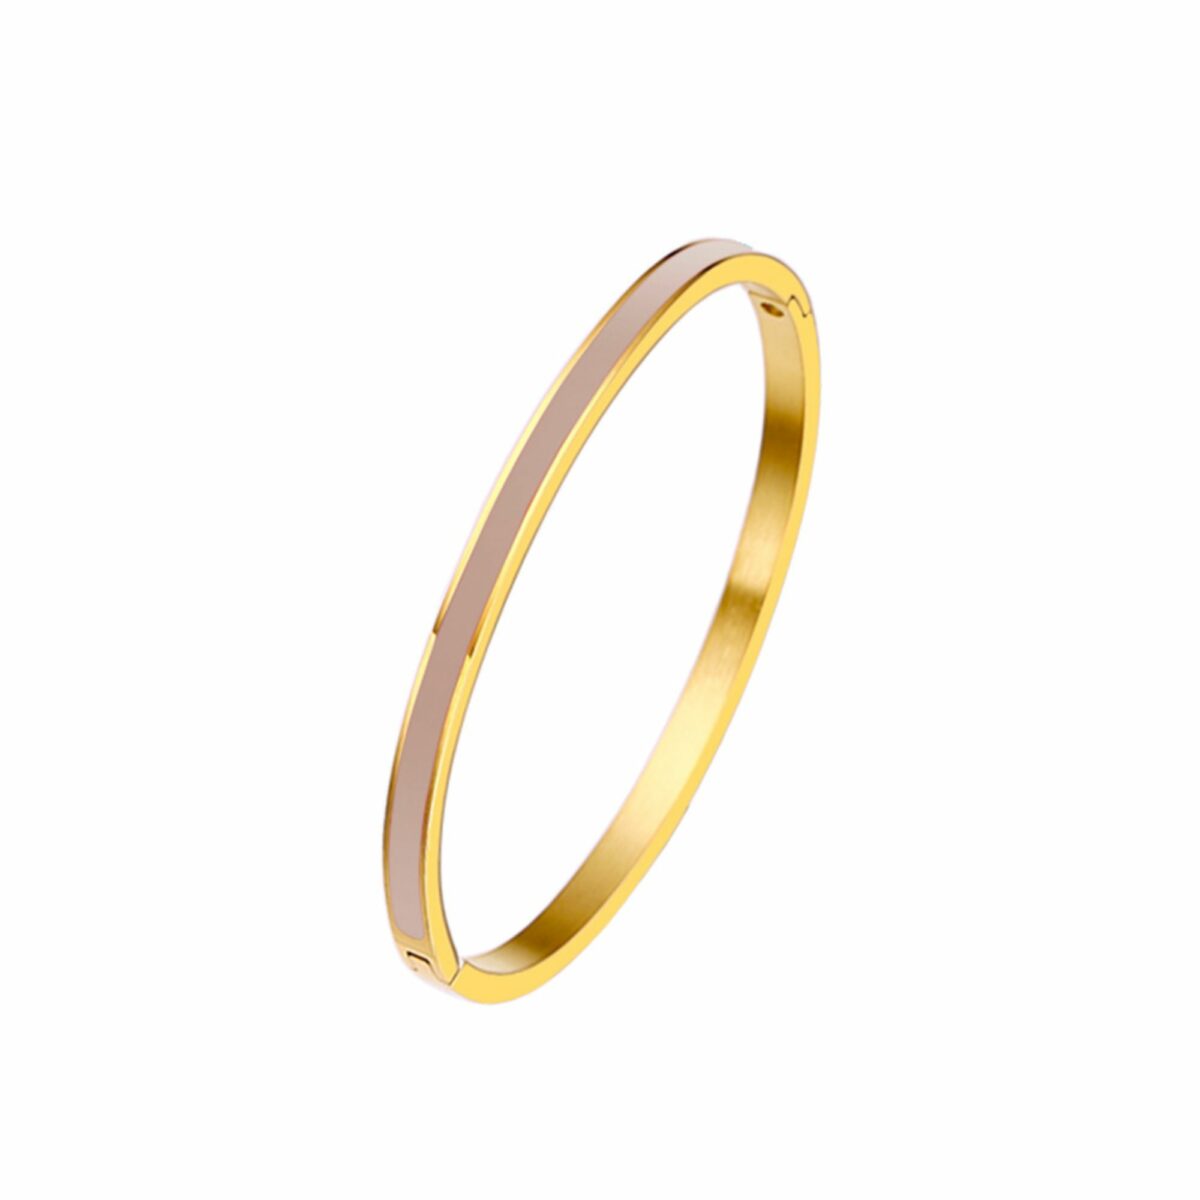 https://m.clubbella.co/product/coral-enamel-gold-bangle/ 1674978198850